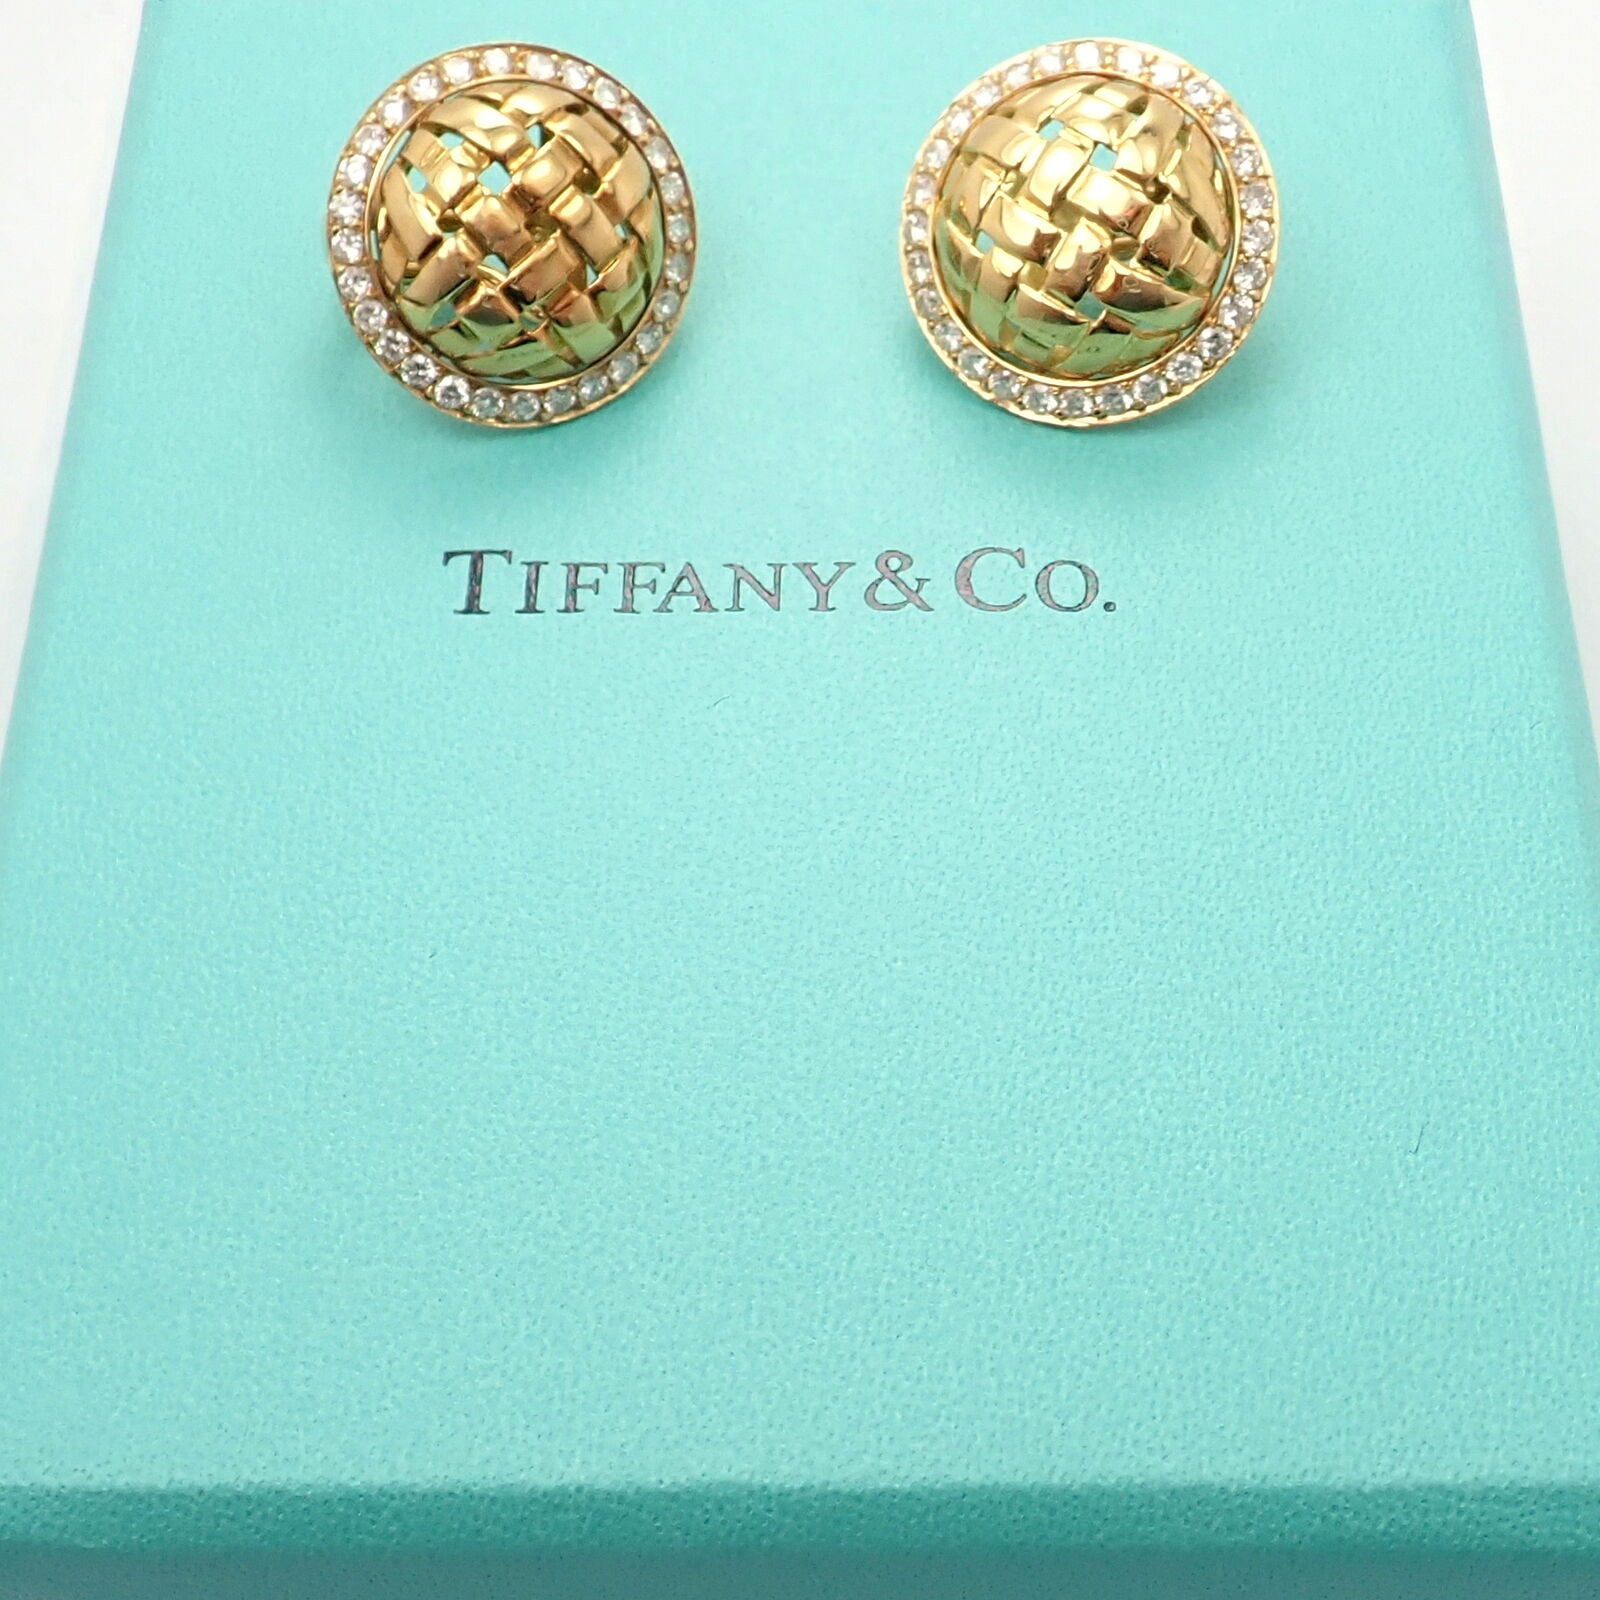 Tiffany & Co. Jewelry & Watches:Fine Jewelry:Earrings Rare! Authentic Tiffany & Co 18k Yellow Gold Vannerie Diamond Earrings 1995